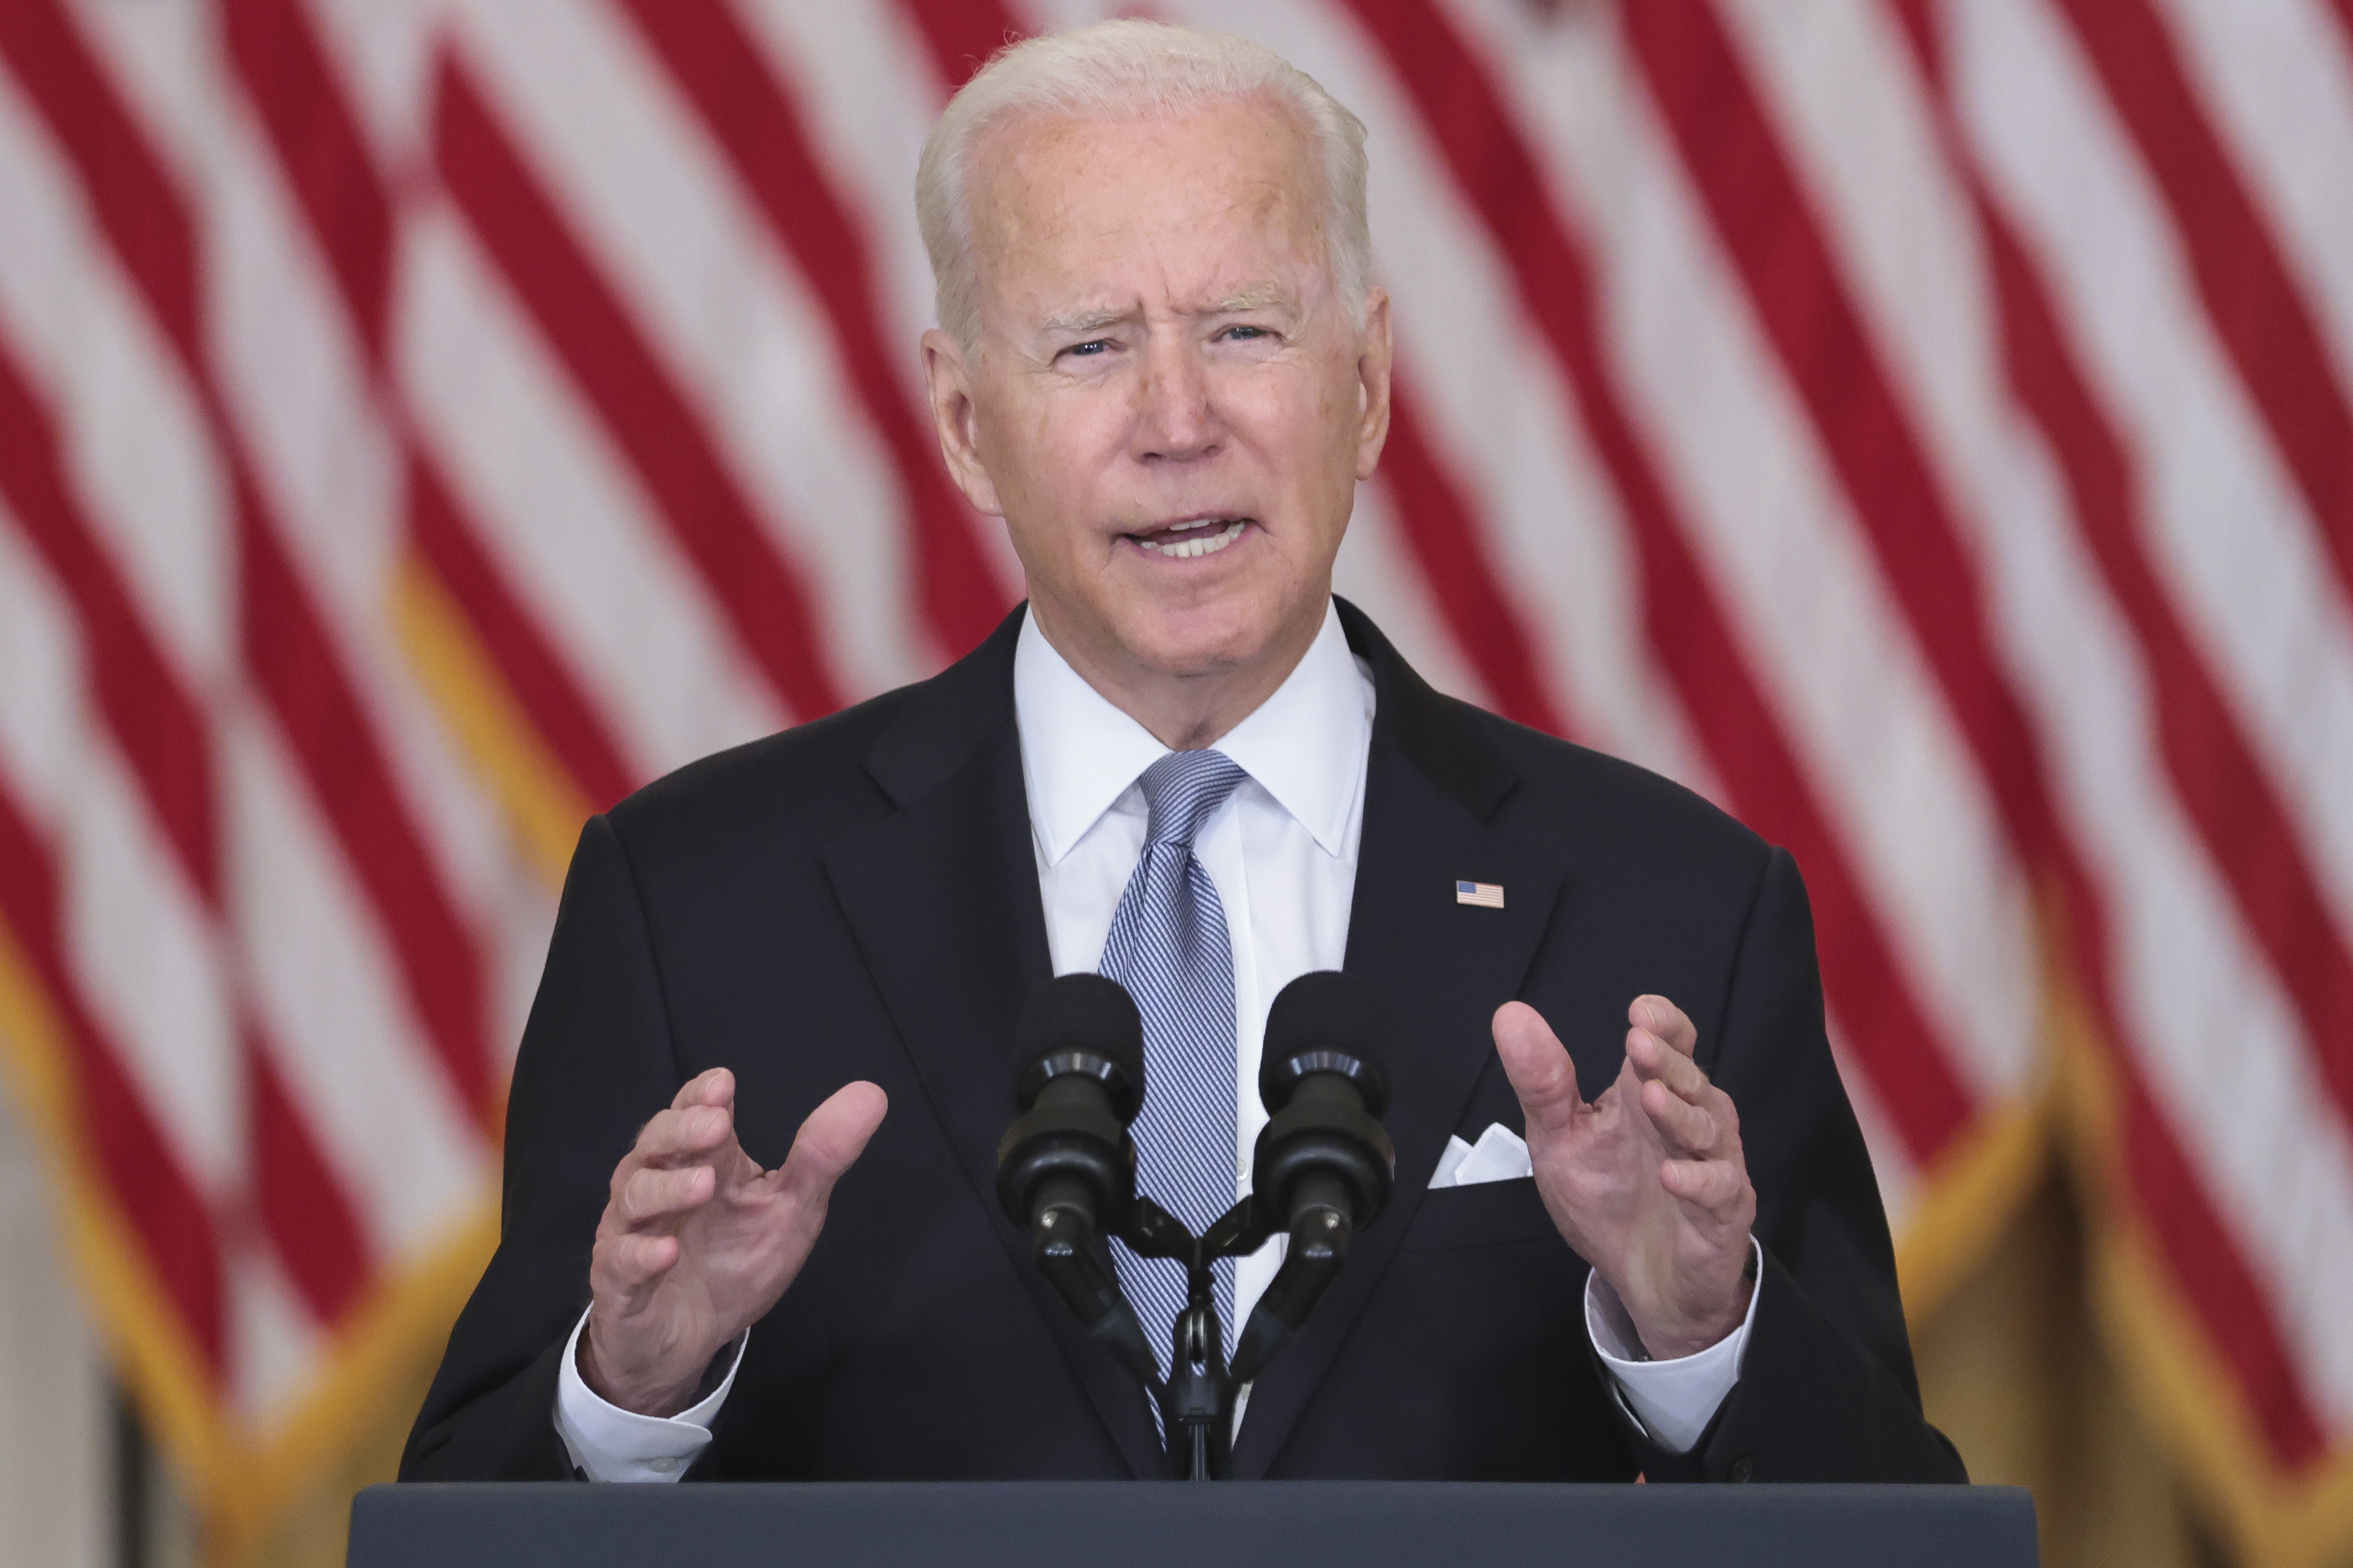 When Biden isn’t in a kind of coma, he’s making weaselly, dishonest speeches to get himself off the hook